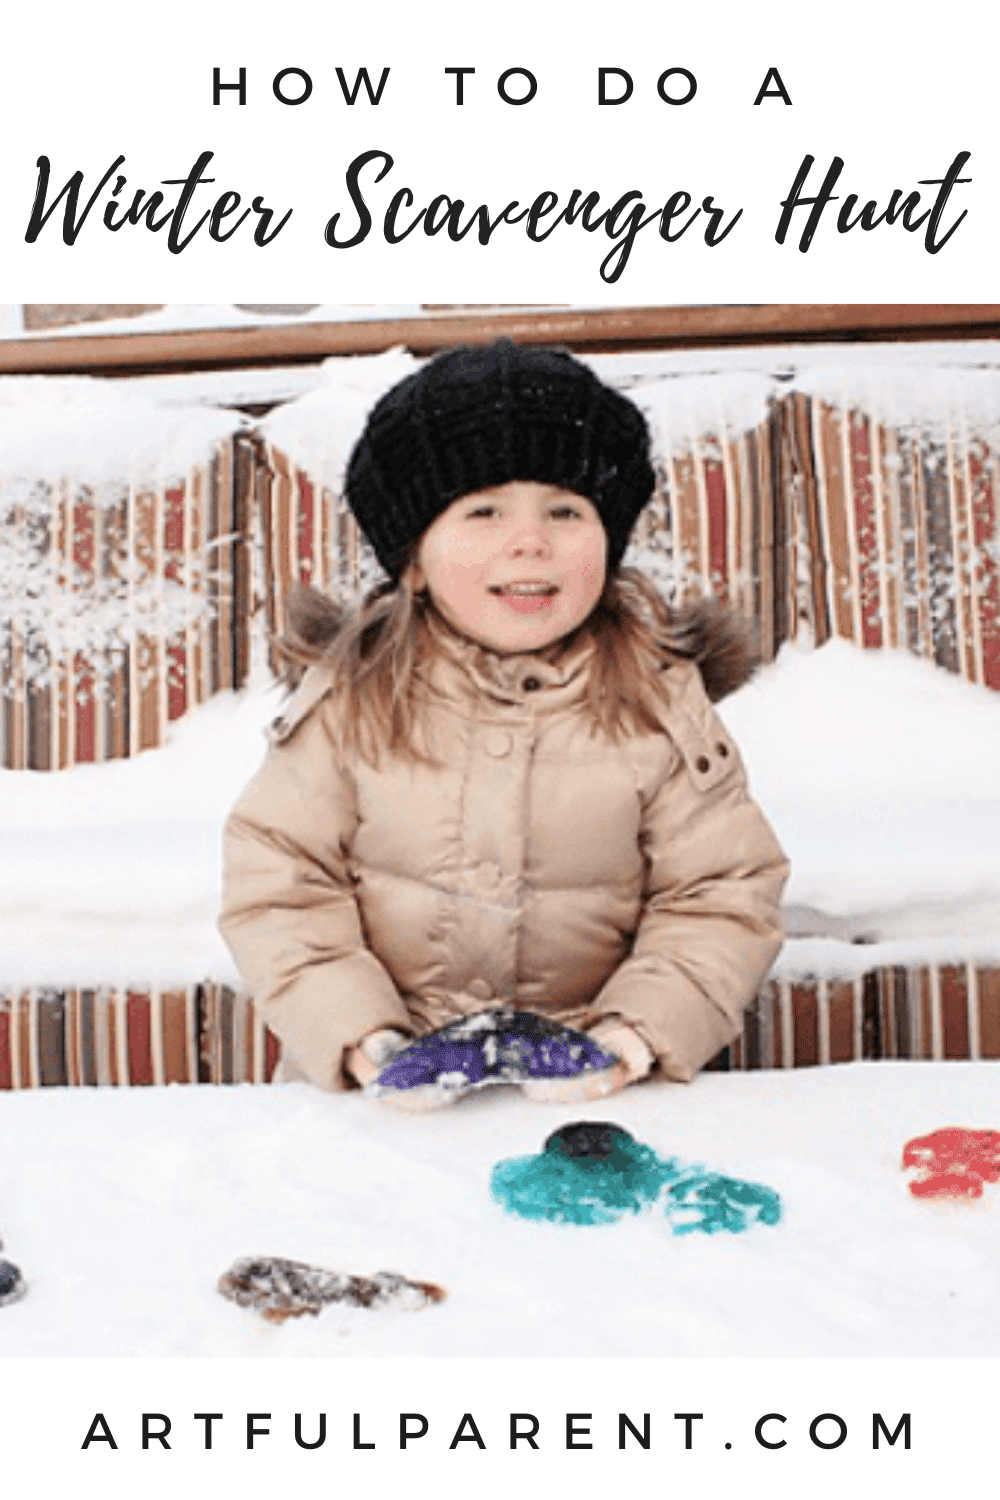 How to Do a Winter Scavenger Hunt for Kids